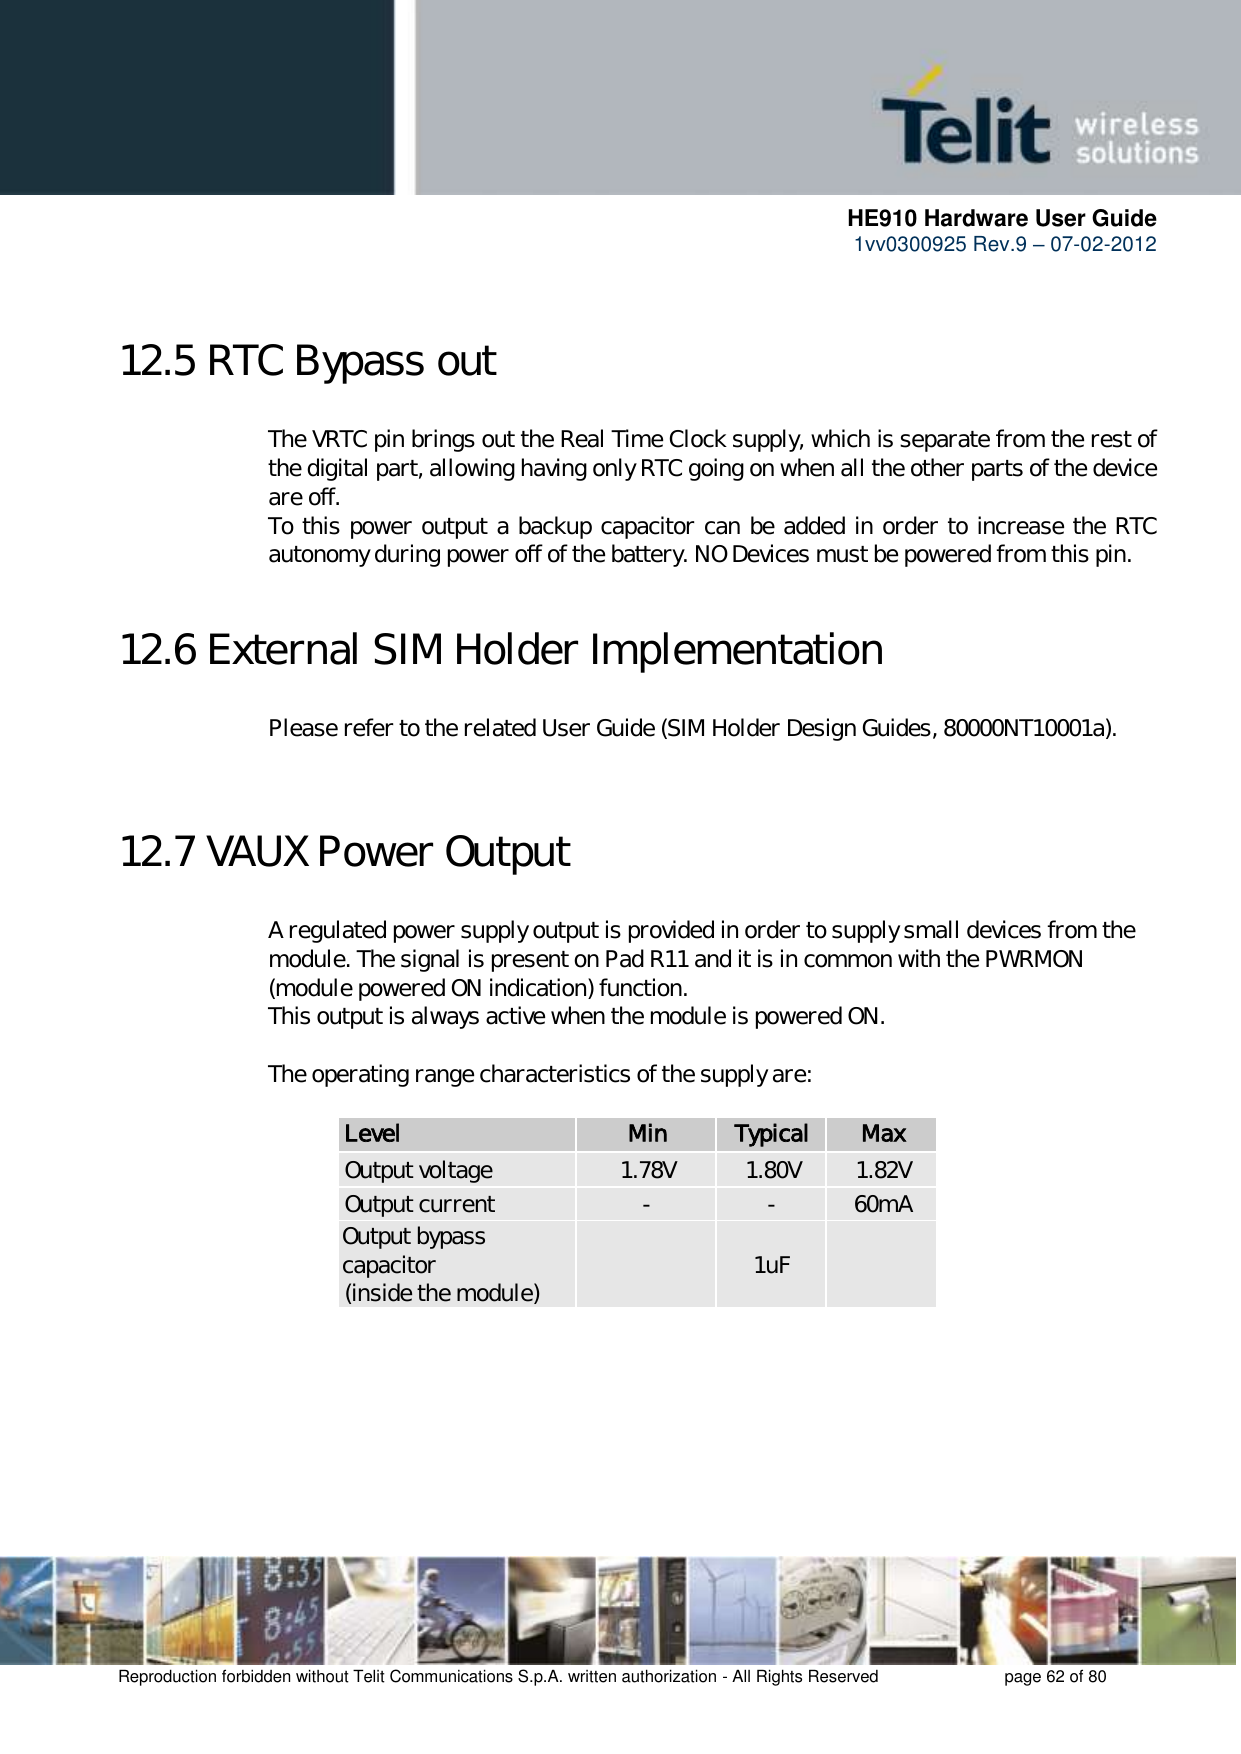      HE910 Hardware User Guide 1vv0300925 Rev.9 – 07-02-2012    Reproduction forbidden without Telit Communications S.p.A. written authorization - All Rights Reserved    page 62 of 80   12.5 RTC Bypass out The VRTC pin brings out the Real Time Clock supply, which is separate from the rest of the digital part, allowing having only RTC going on when all the other parts of the device are off. To this power output a backup capacitor can be added in order to increase the RTC autonomy during power off of the battery. NO Devices must be powered from this pin.  12.6 External SIM Holder Implementation Please refer to the related User Guide (SIM Holder Design Guides, 80000NT10001a).   12.7 VAUX Power Output A regulated power supply output is provided in order to supply small devices from the module. The signal is present on Pad R11 and it is in common with the PWRMON (module powered ON indication) function. This output is always active when the module is powered ON.  The operating range characteristics of the supply are:  Level Min Typical Max Output voltage 1.78V 1.80V 1.82V Output current - - 60mA Output bypass capacitor (inside the module)  1uF      